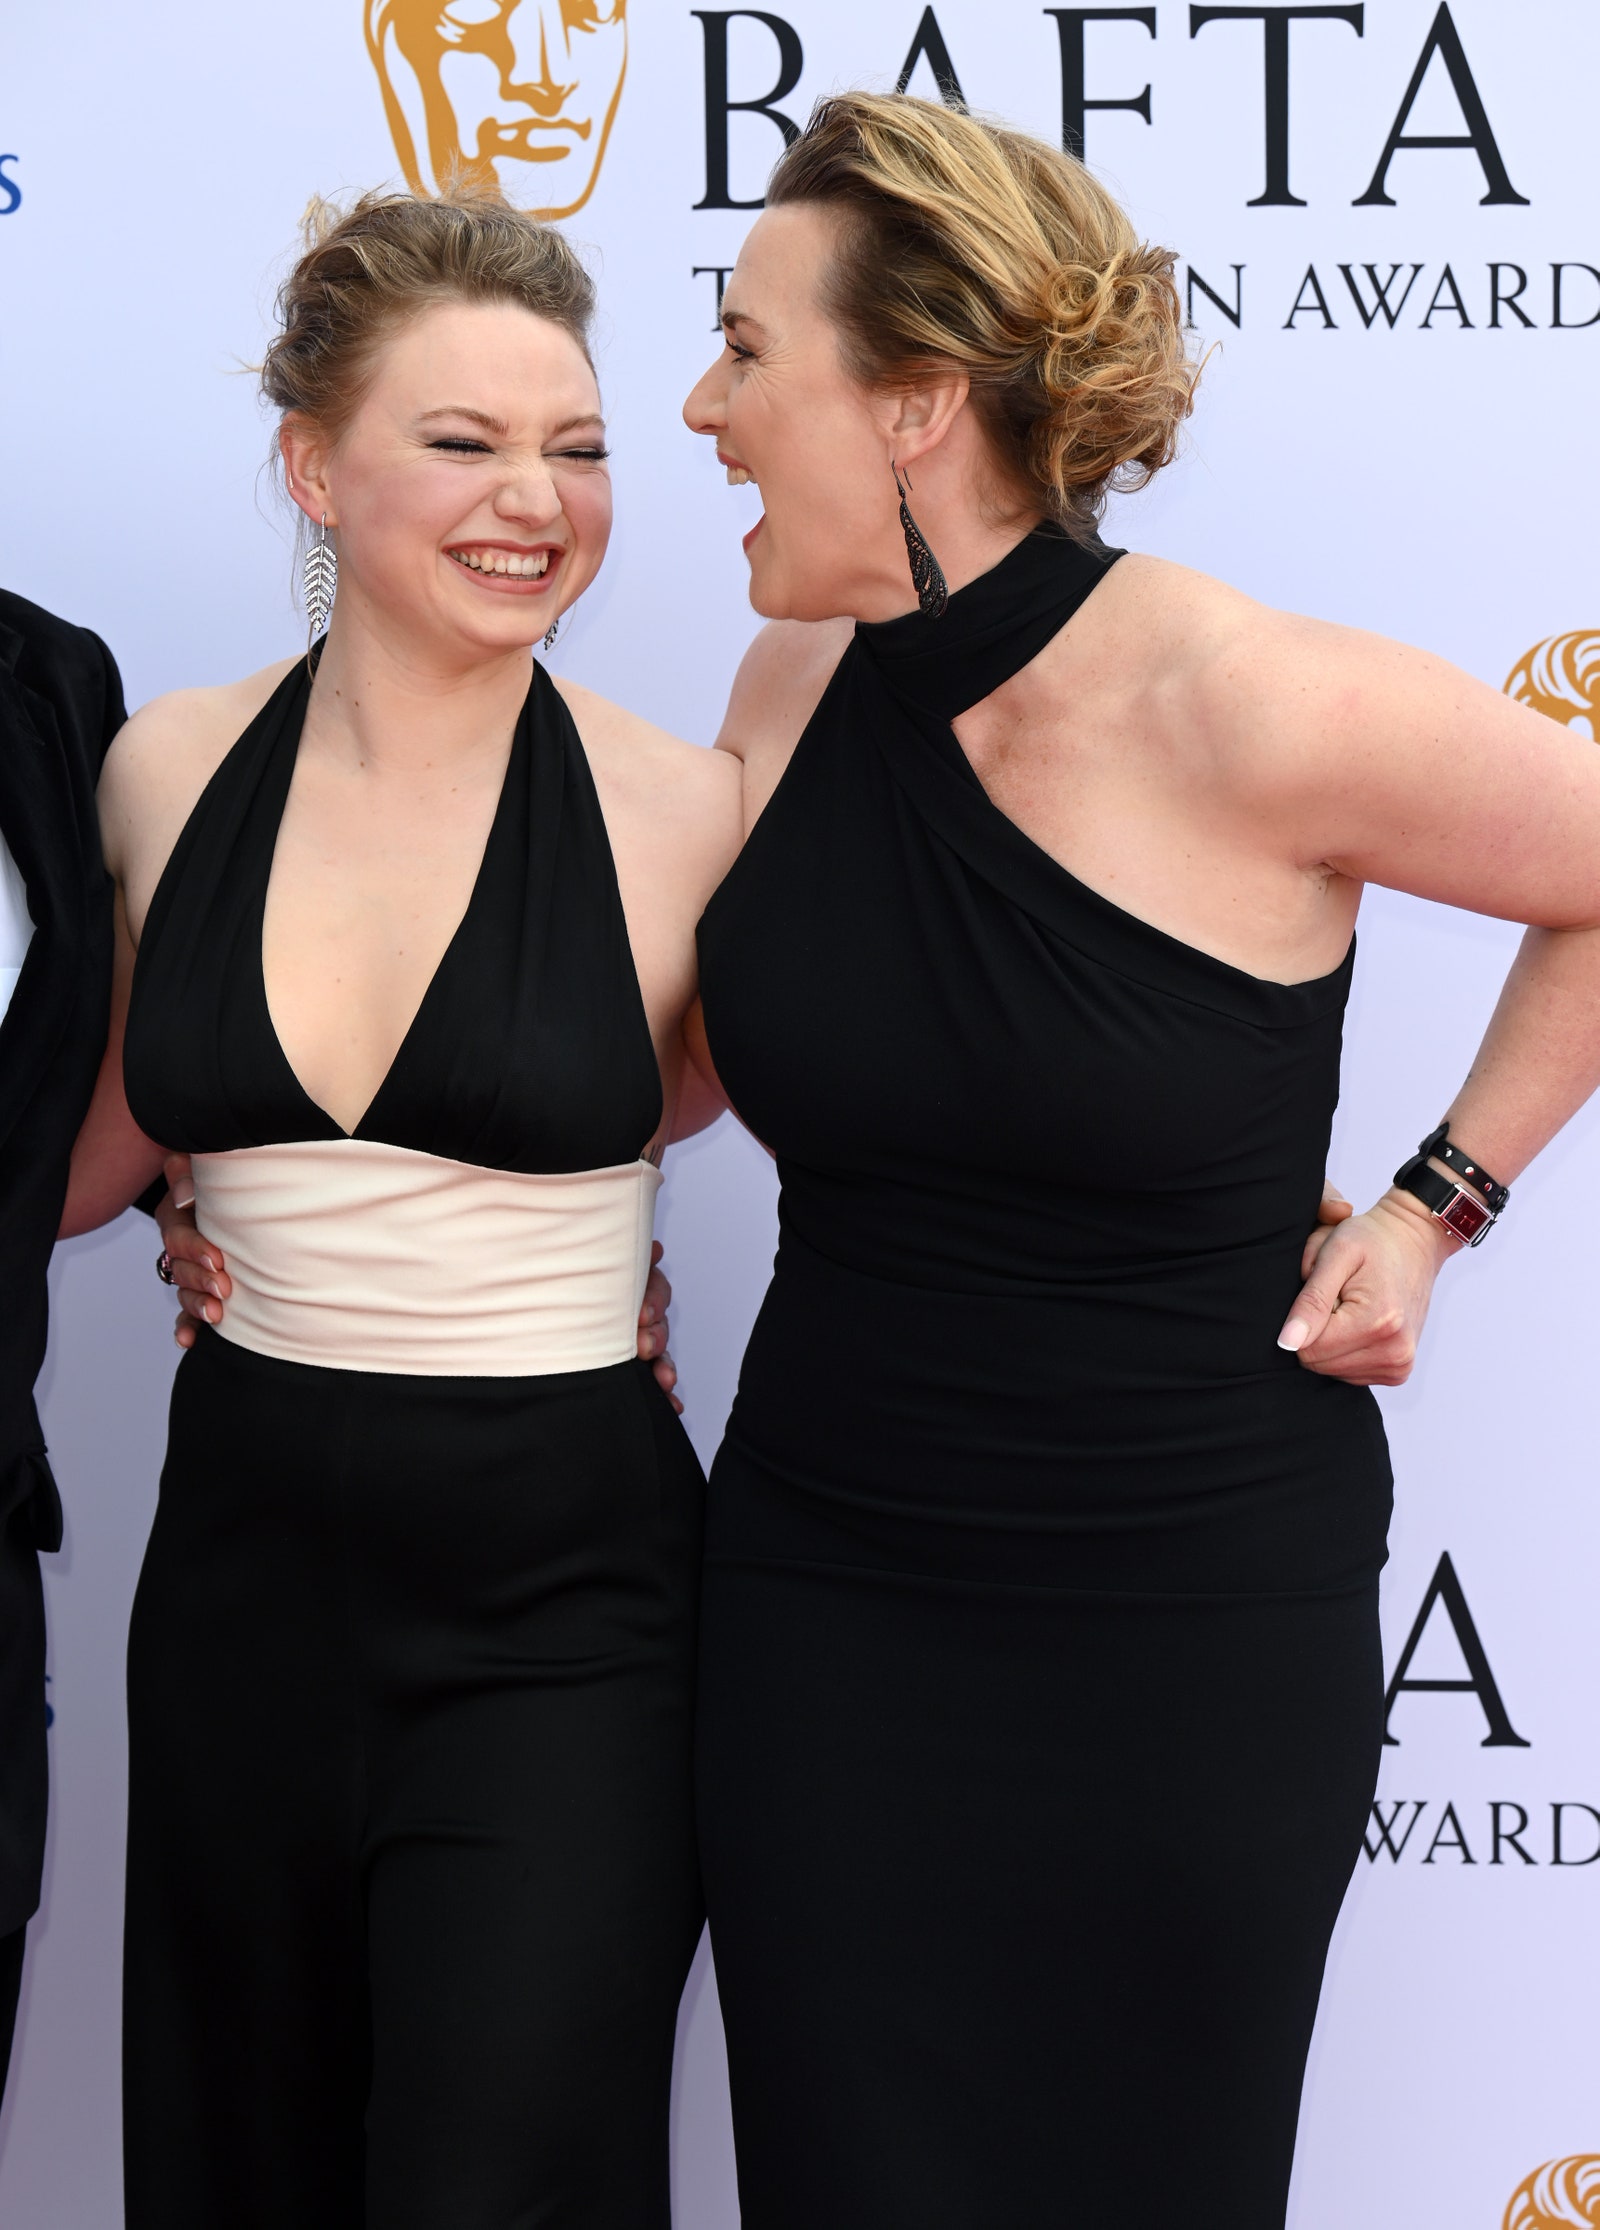 Kate Winslet and her daughter Mia Threapleton.